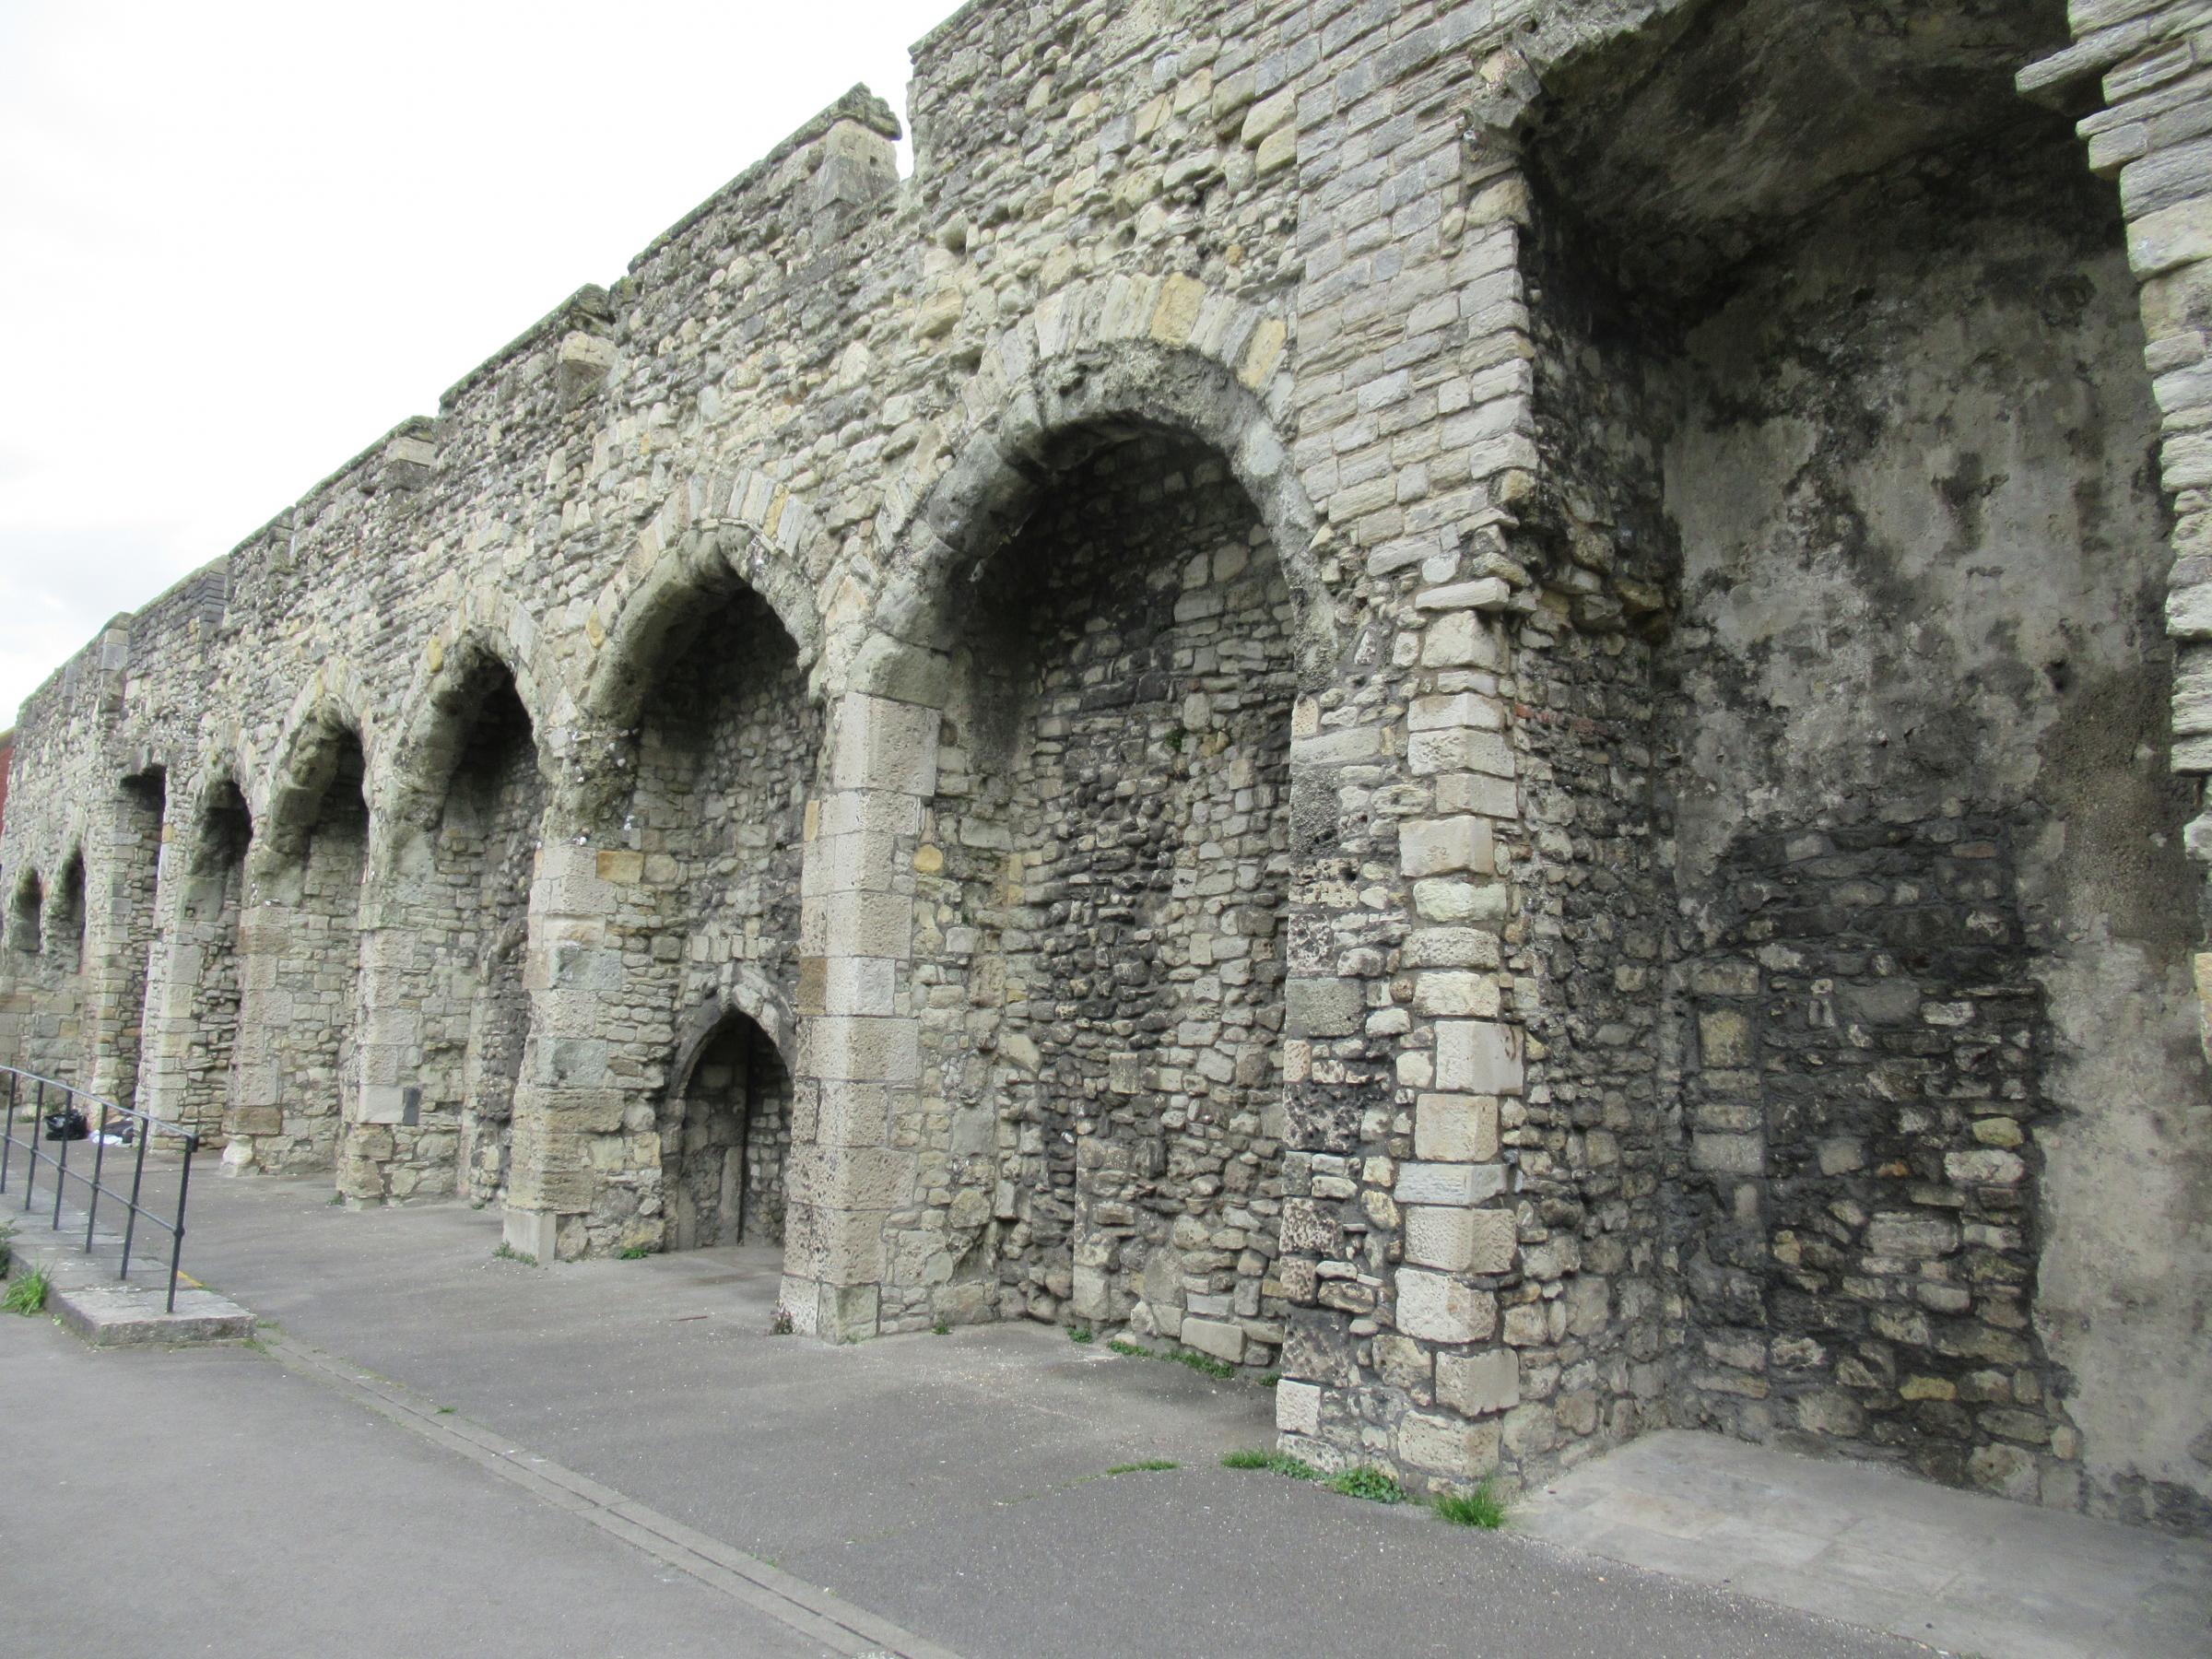 Arches in the city walls.